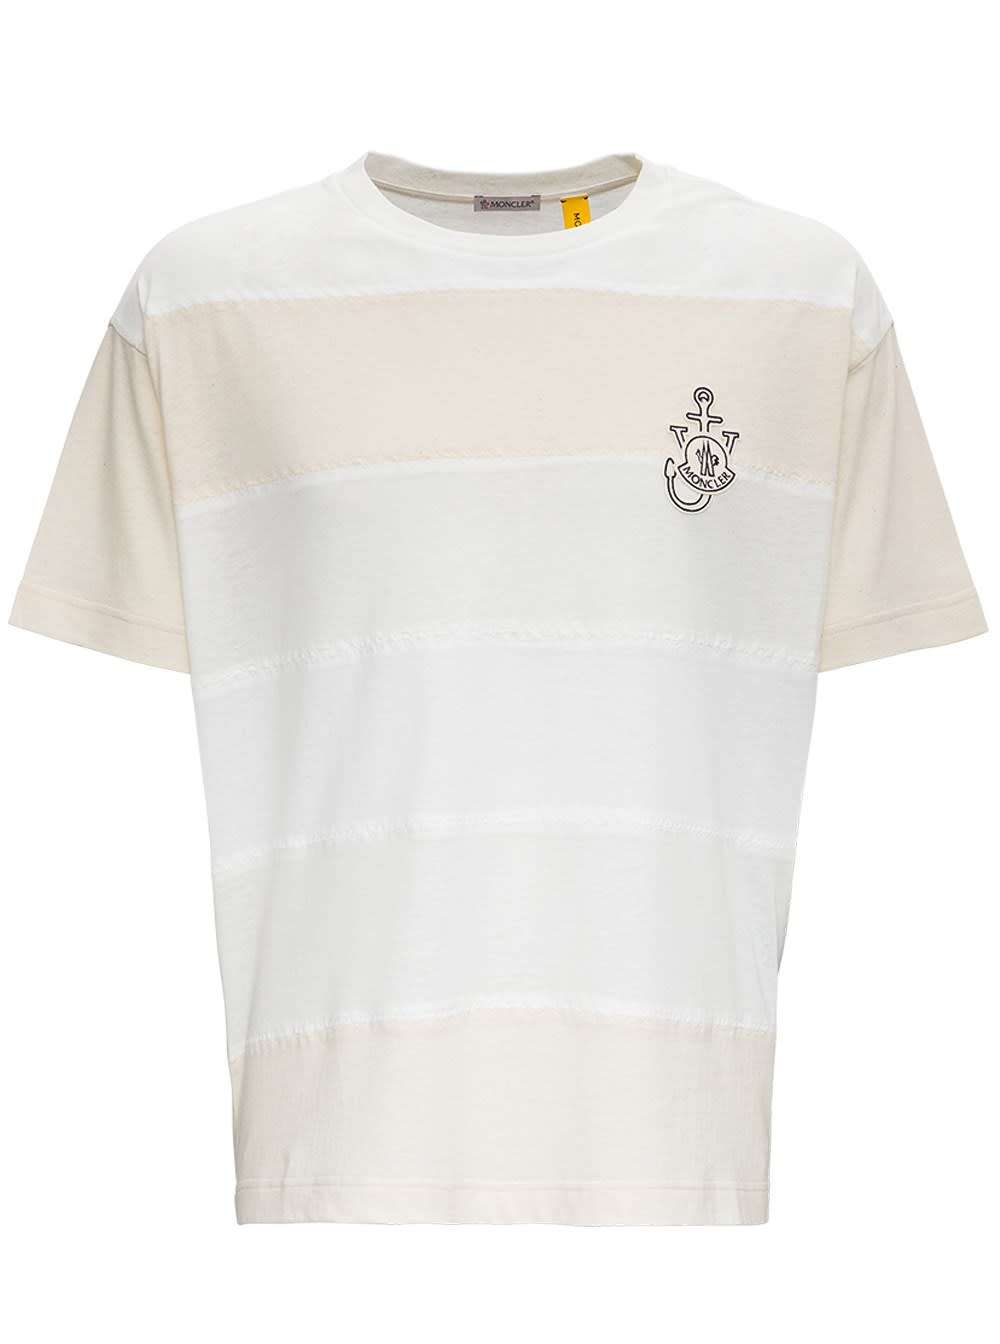 Moncler Genius Striped Tee By Jw Anderson